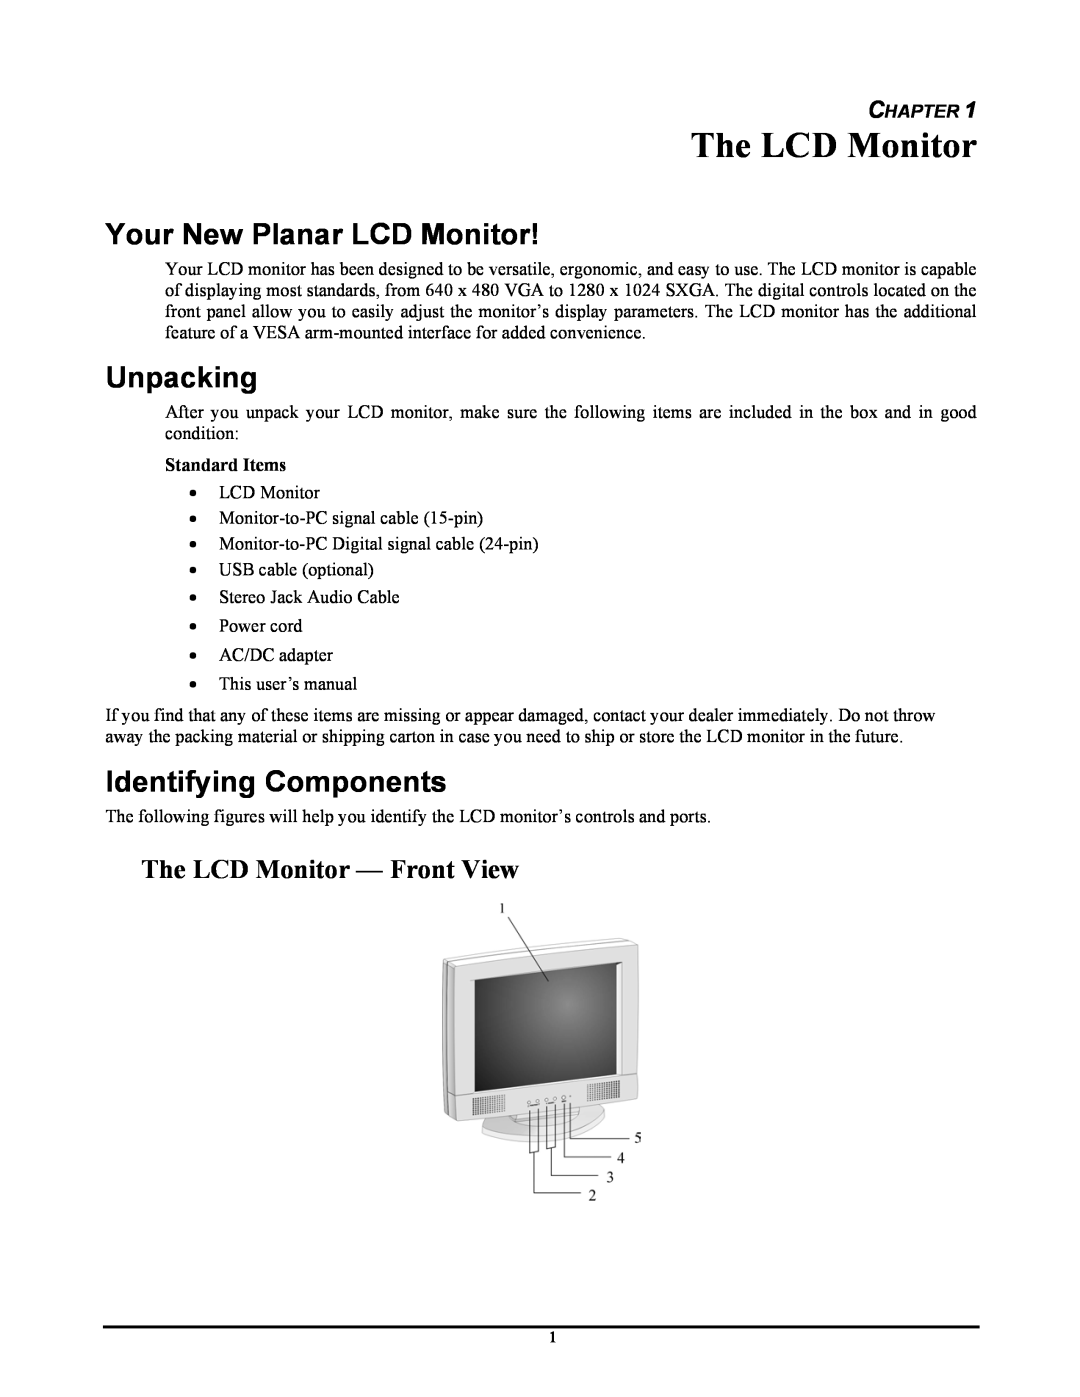 Planar CT1744NU manual The LCD Monitor, Your New Planar LCD Monitor, Unpacking, Identifying Components, Chapter 